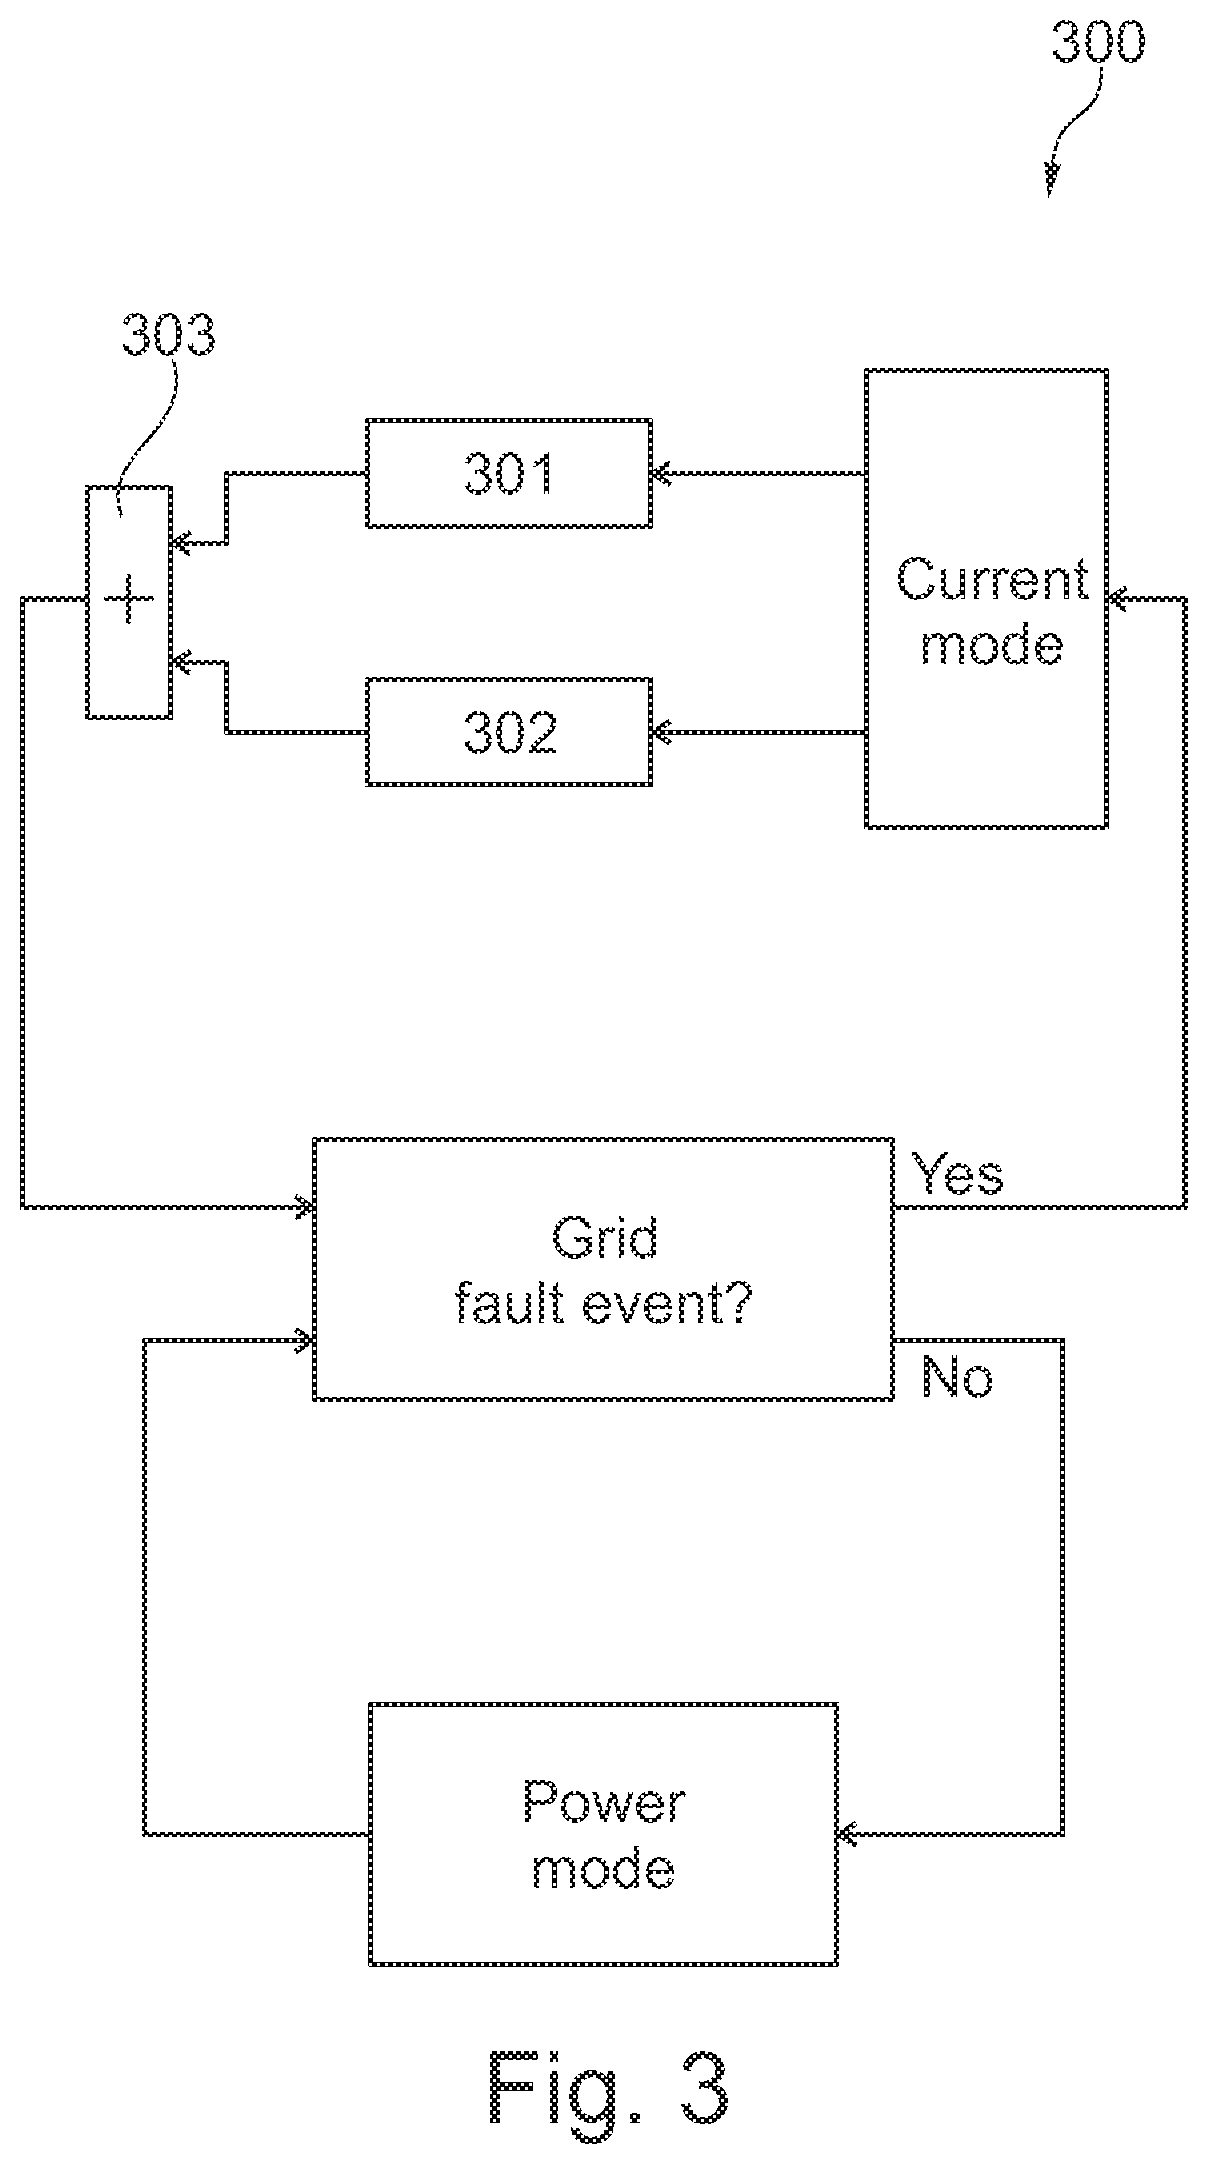 Balancing reactive current between a dfig stator and a grid-side inverter